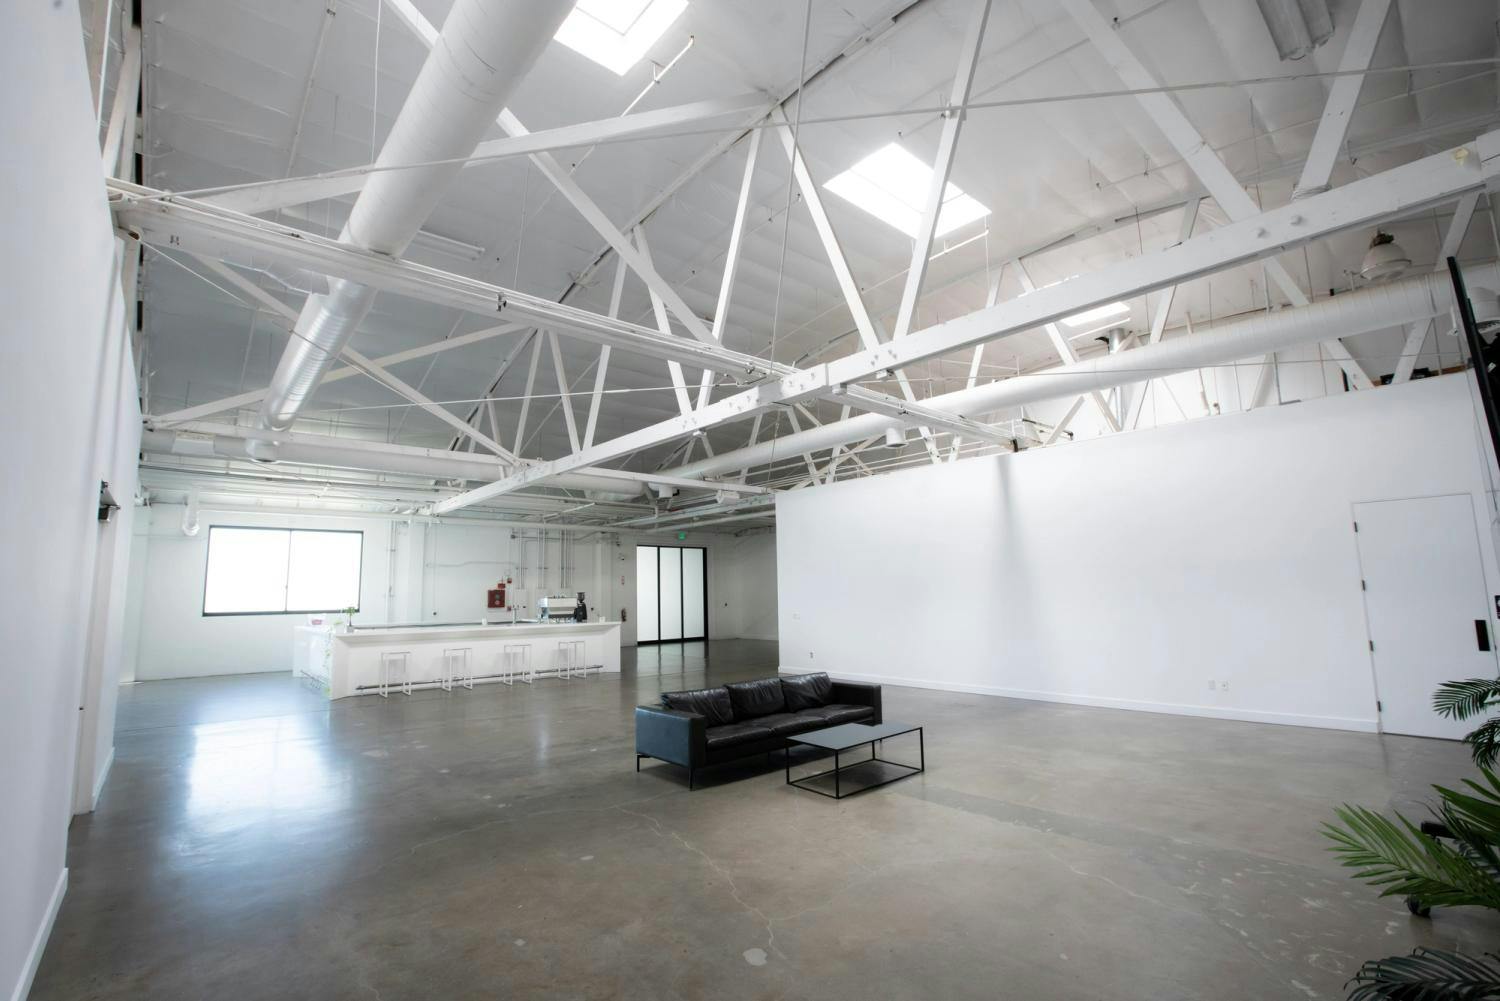 A large, airy gallery space featuring a black leather couch, white walls for artwork, and a natural light-filled environment with industrial accents.